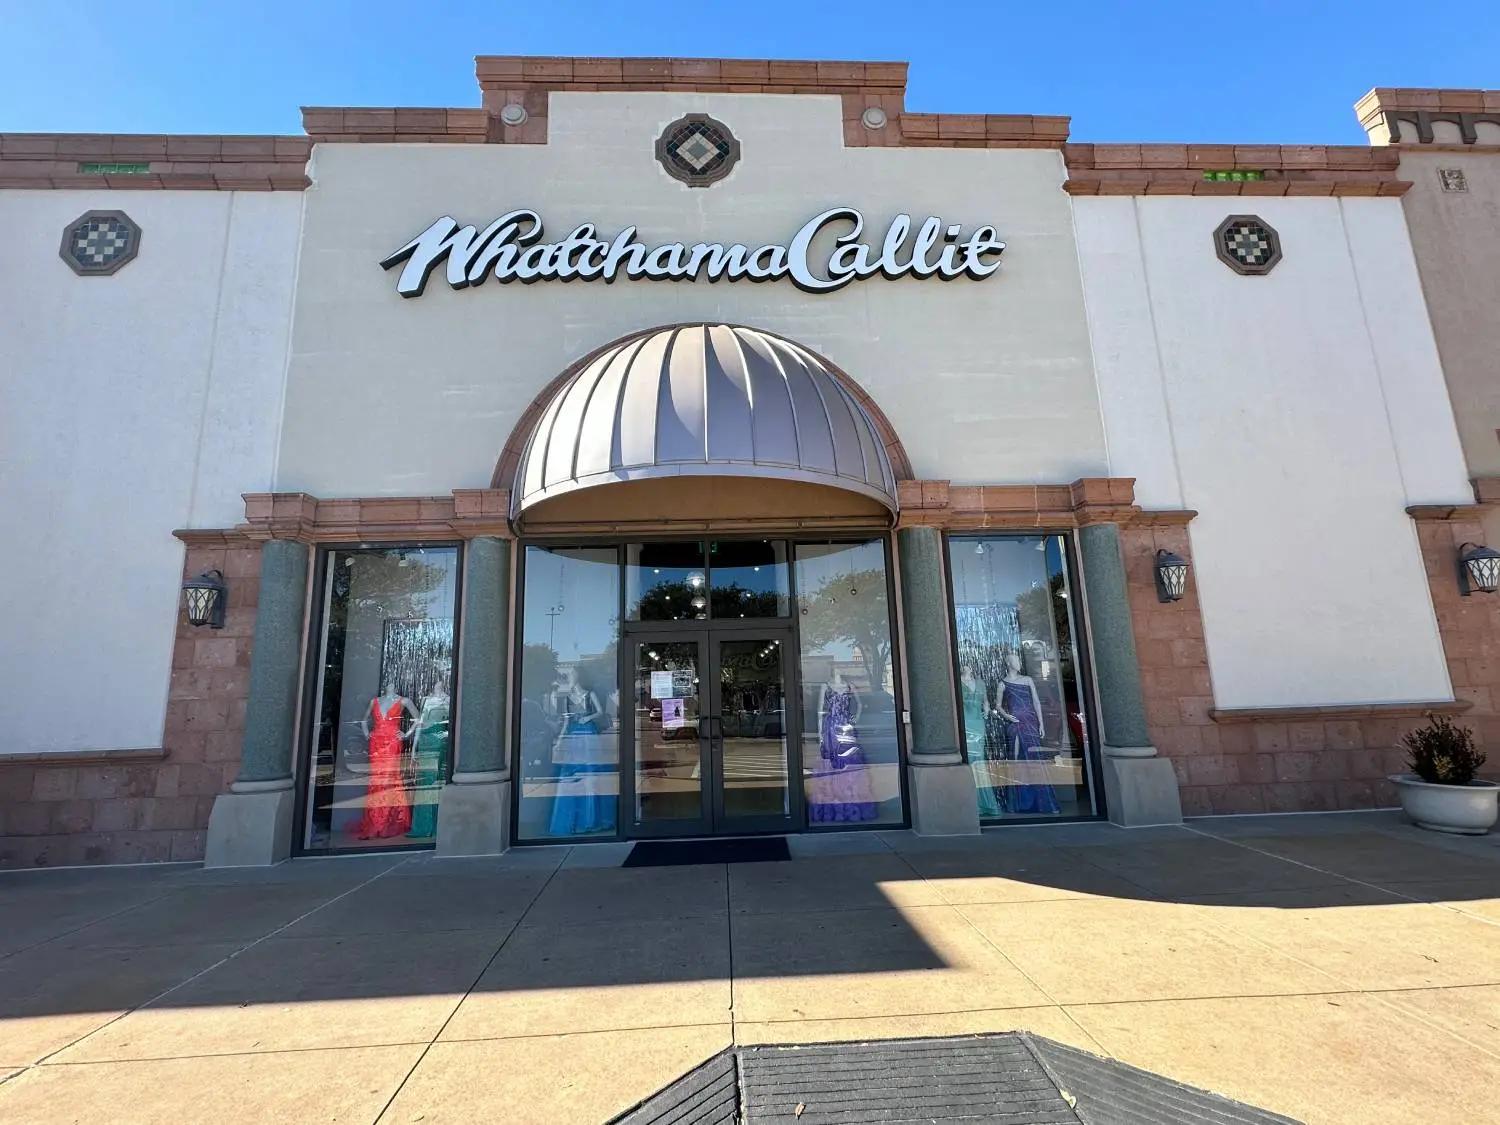 Whatchamacallit Fort Worth Store Front